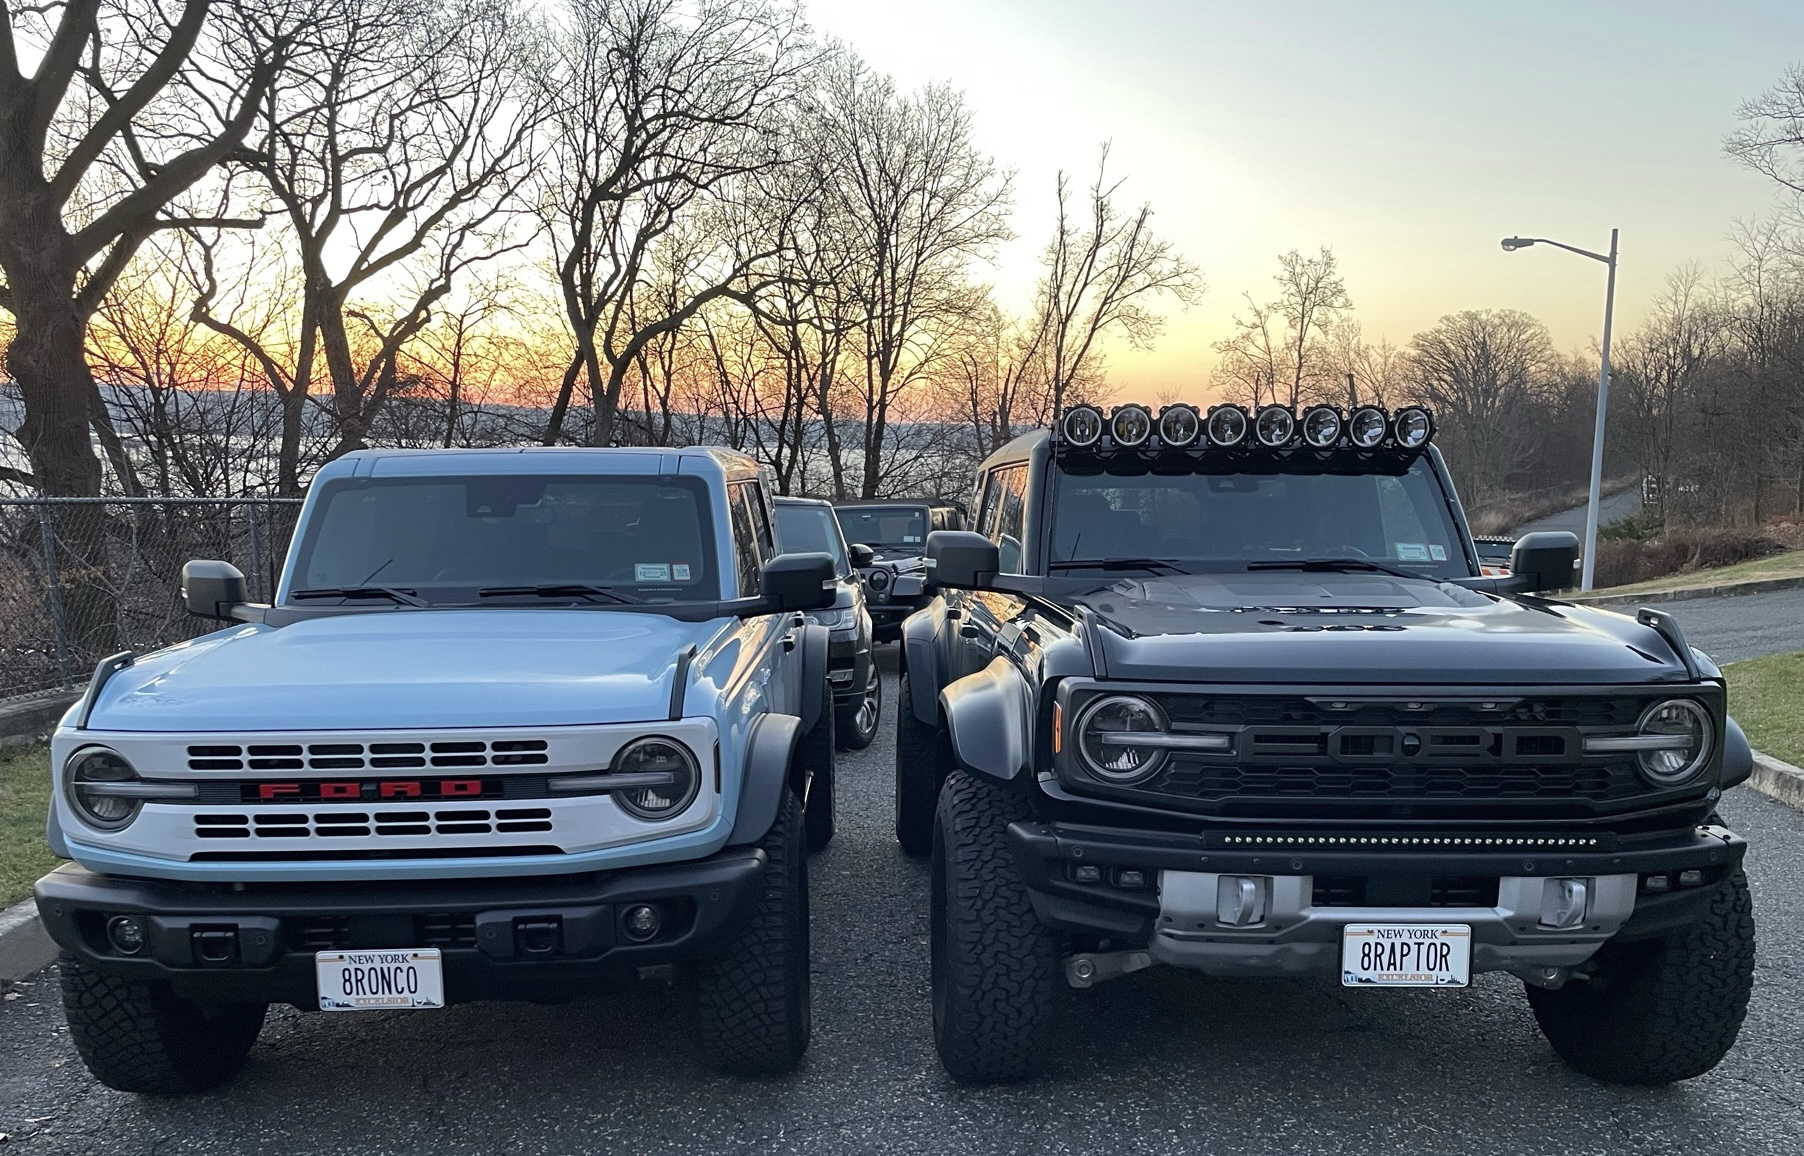 Ford Bronco PRICE DROP - Finally a Front License Plate bracket solution - order yours today image1